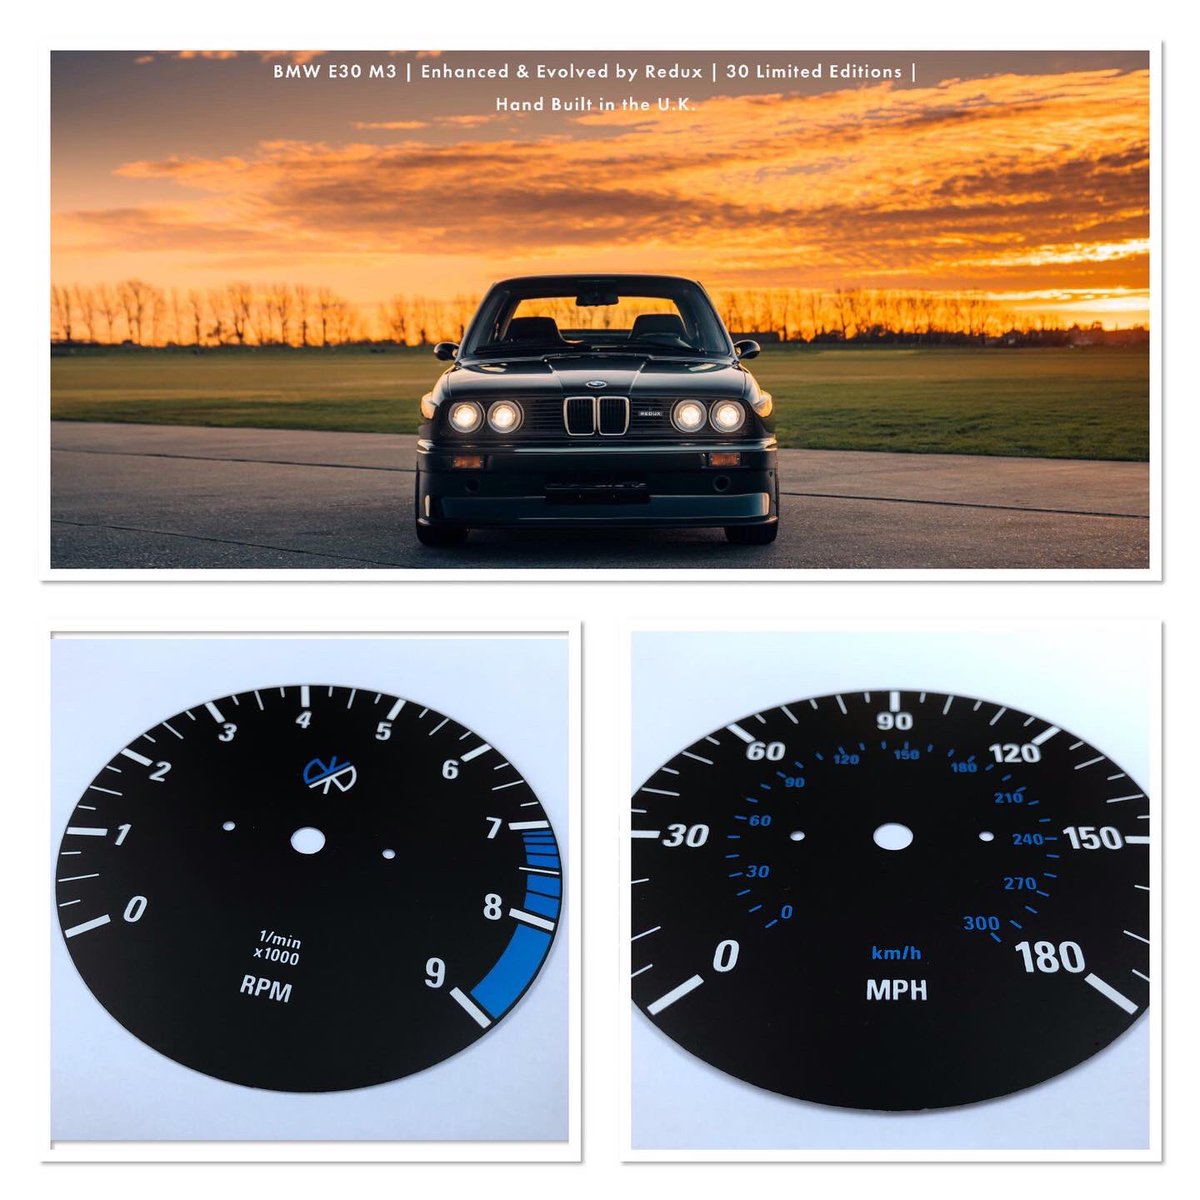 A limited edition series of BMW E30 M3s, Enhanced and Evolved by the amazing Redux with gauge design & integration by us. #BMW #E30M3 #Redux #modification #restomod #BMWM #BMWmotorsport #M3 #M30 #Blue #UKcompany #petersonevgauges #CANbus #CANbusgauges #gauges 
#customgauges